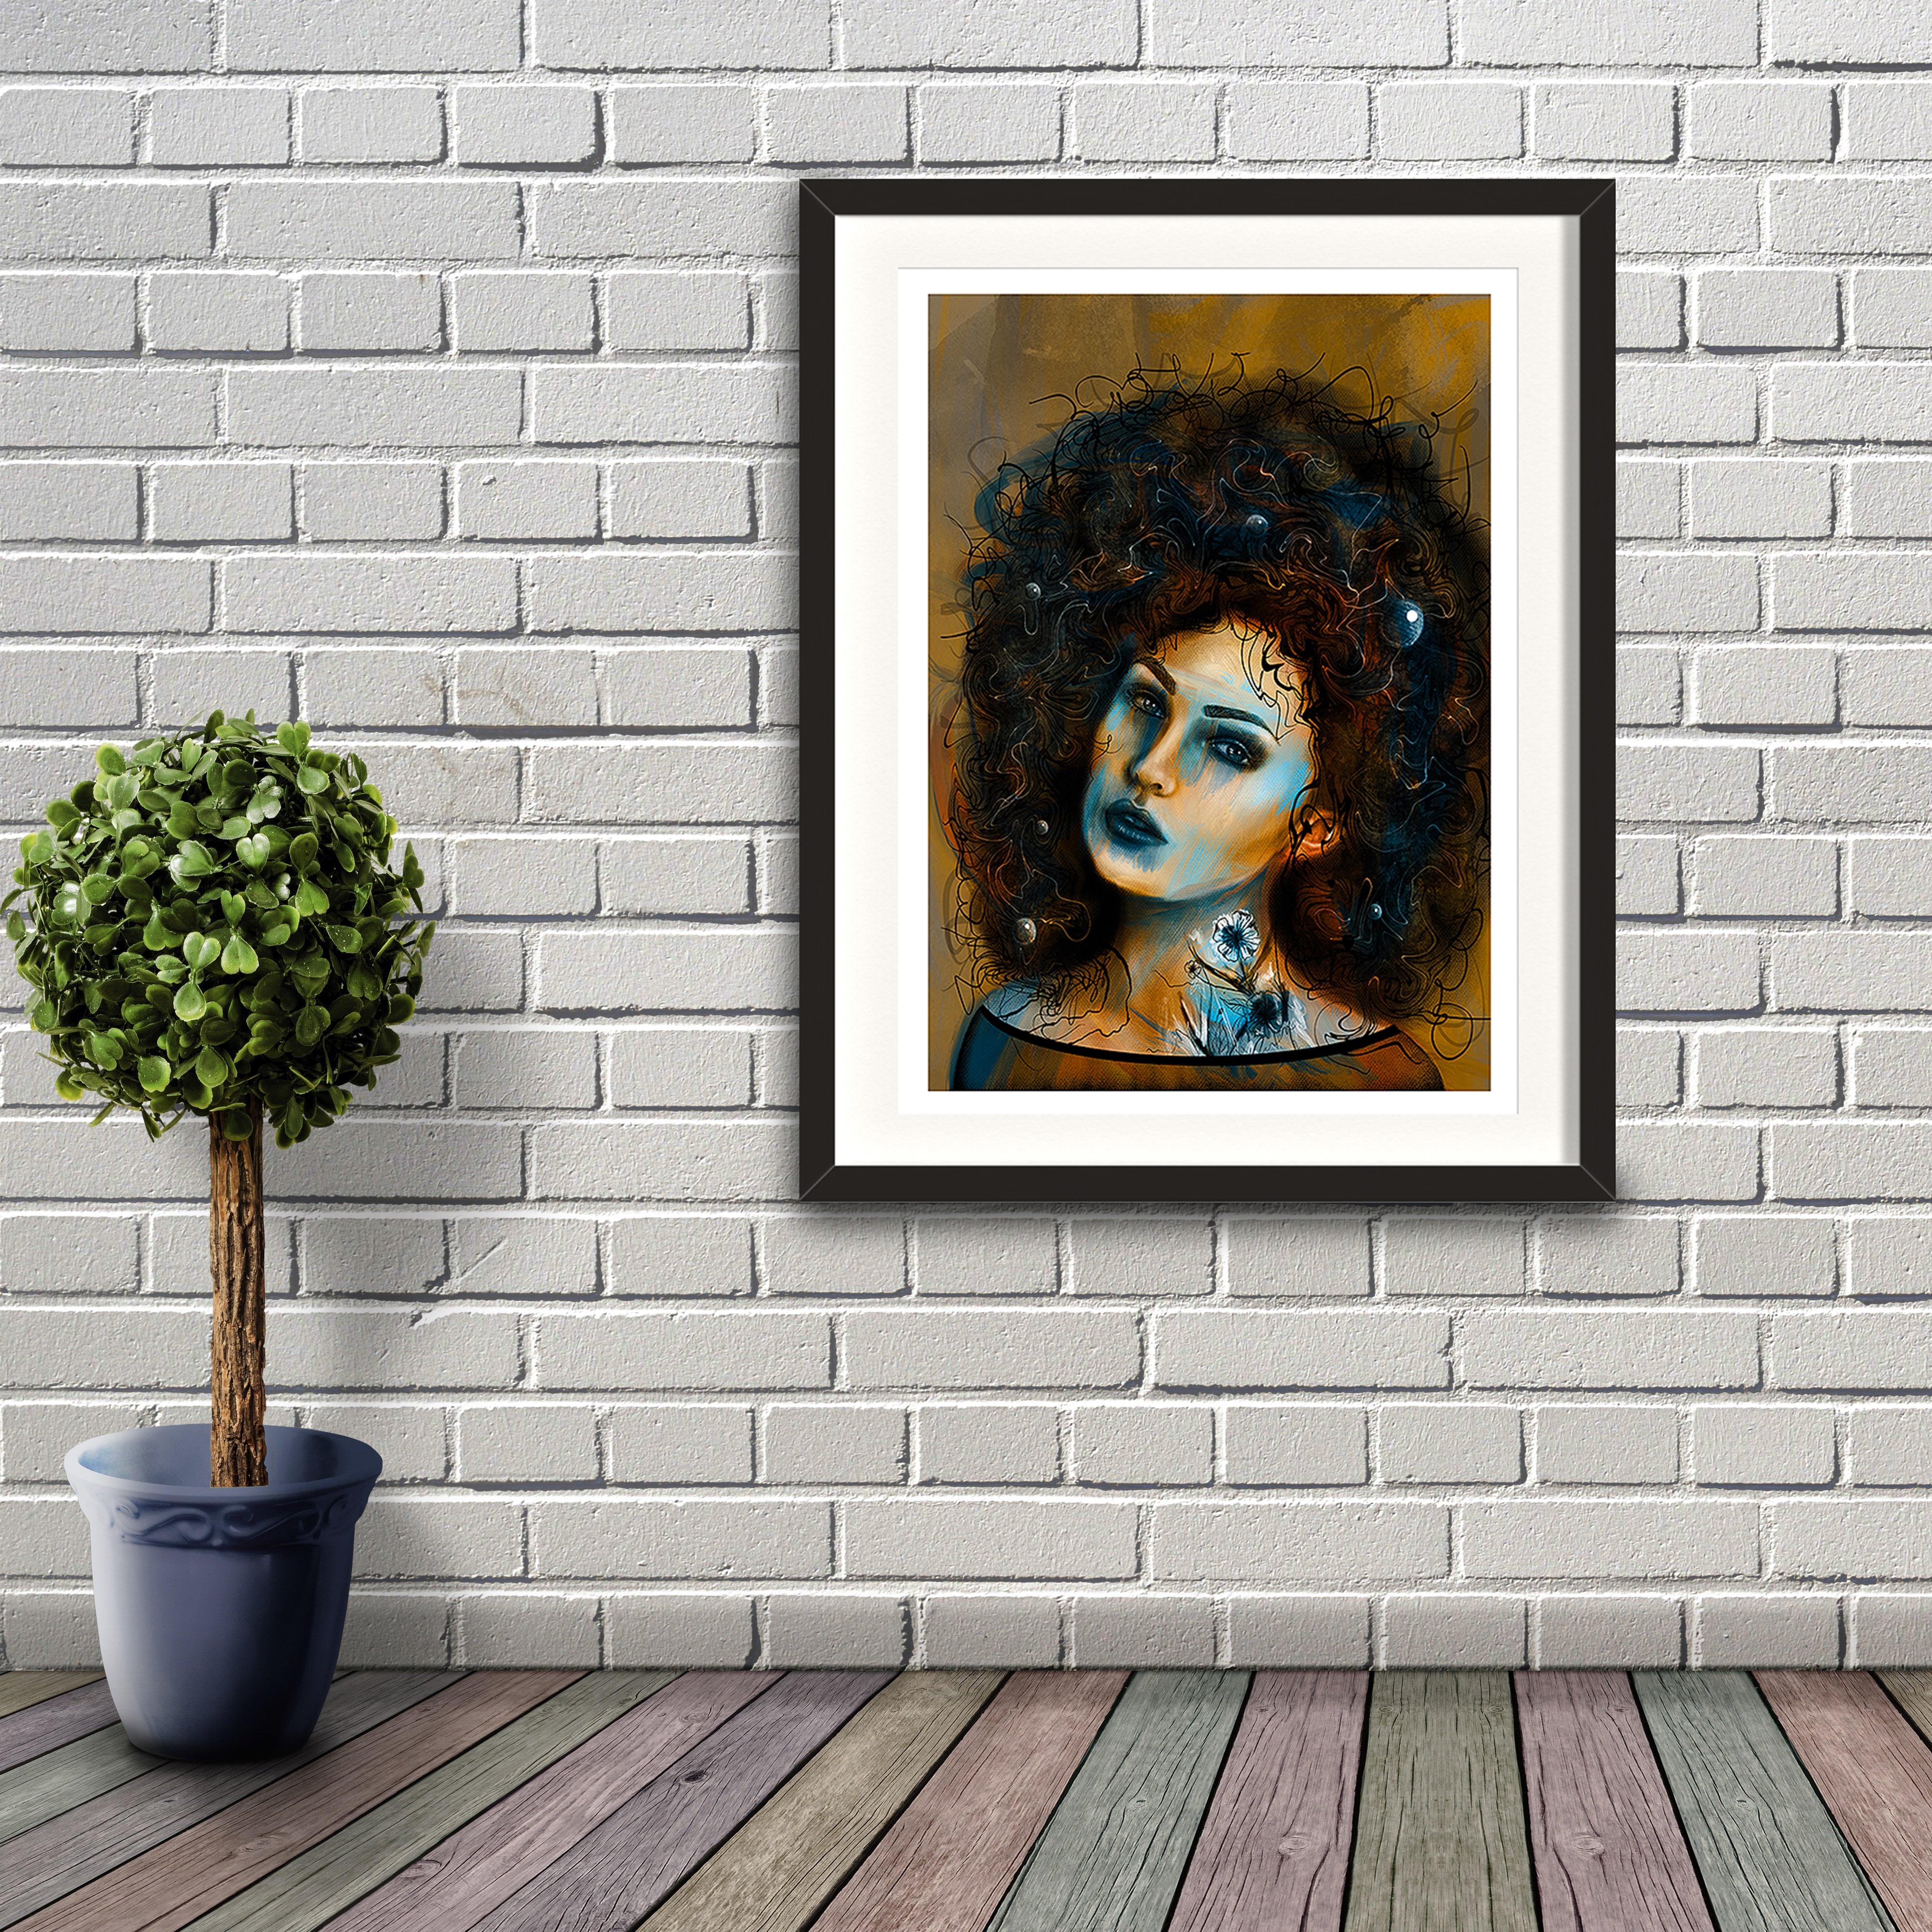 A digital painting called Art Posed 1 by Lily Bourne showing a female head with enormous curly hair and a white tattoo flower on her neck and decorations in her hair. Artwork shown in a black frame hanging on a brick wall.